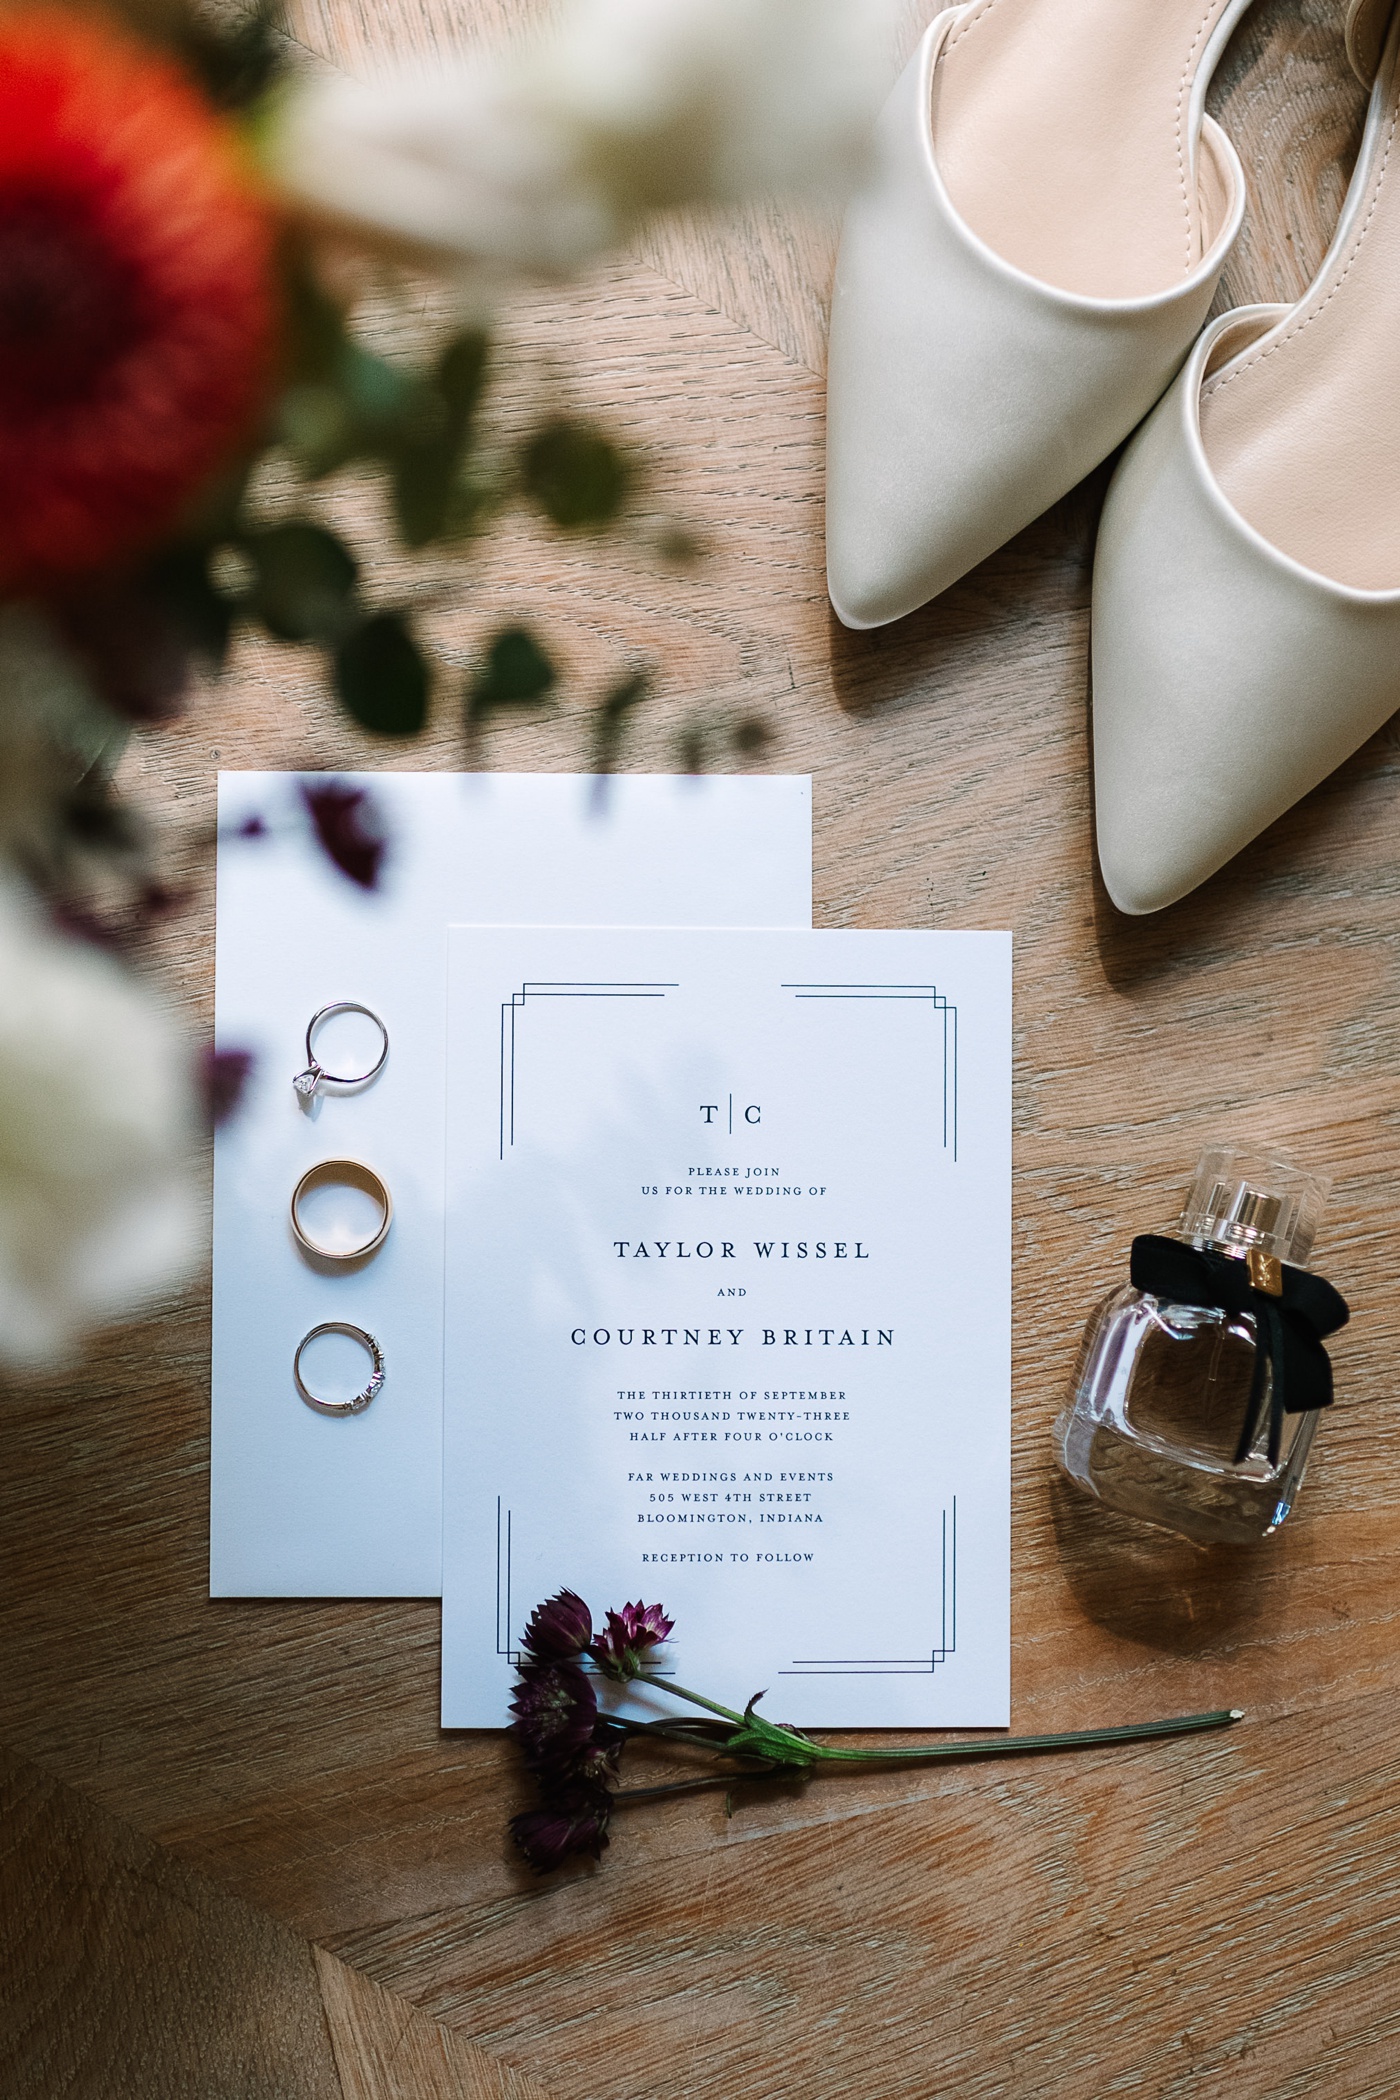 Flatlay with a black and white wedding invitation, white bridal shoes, and YSL perfume